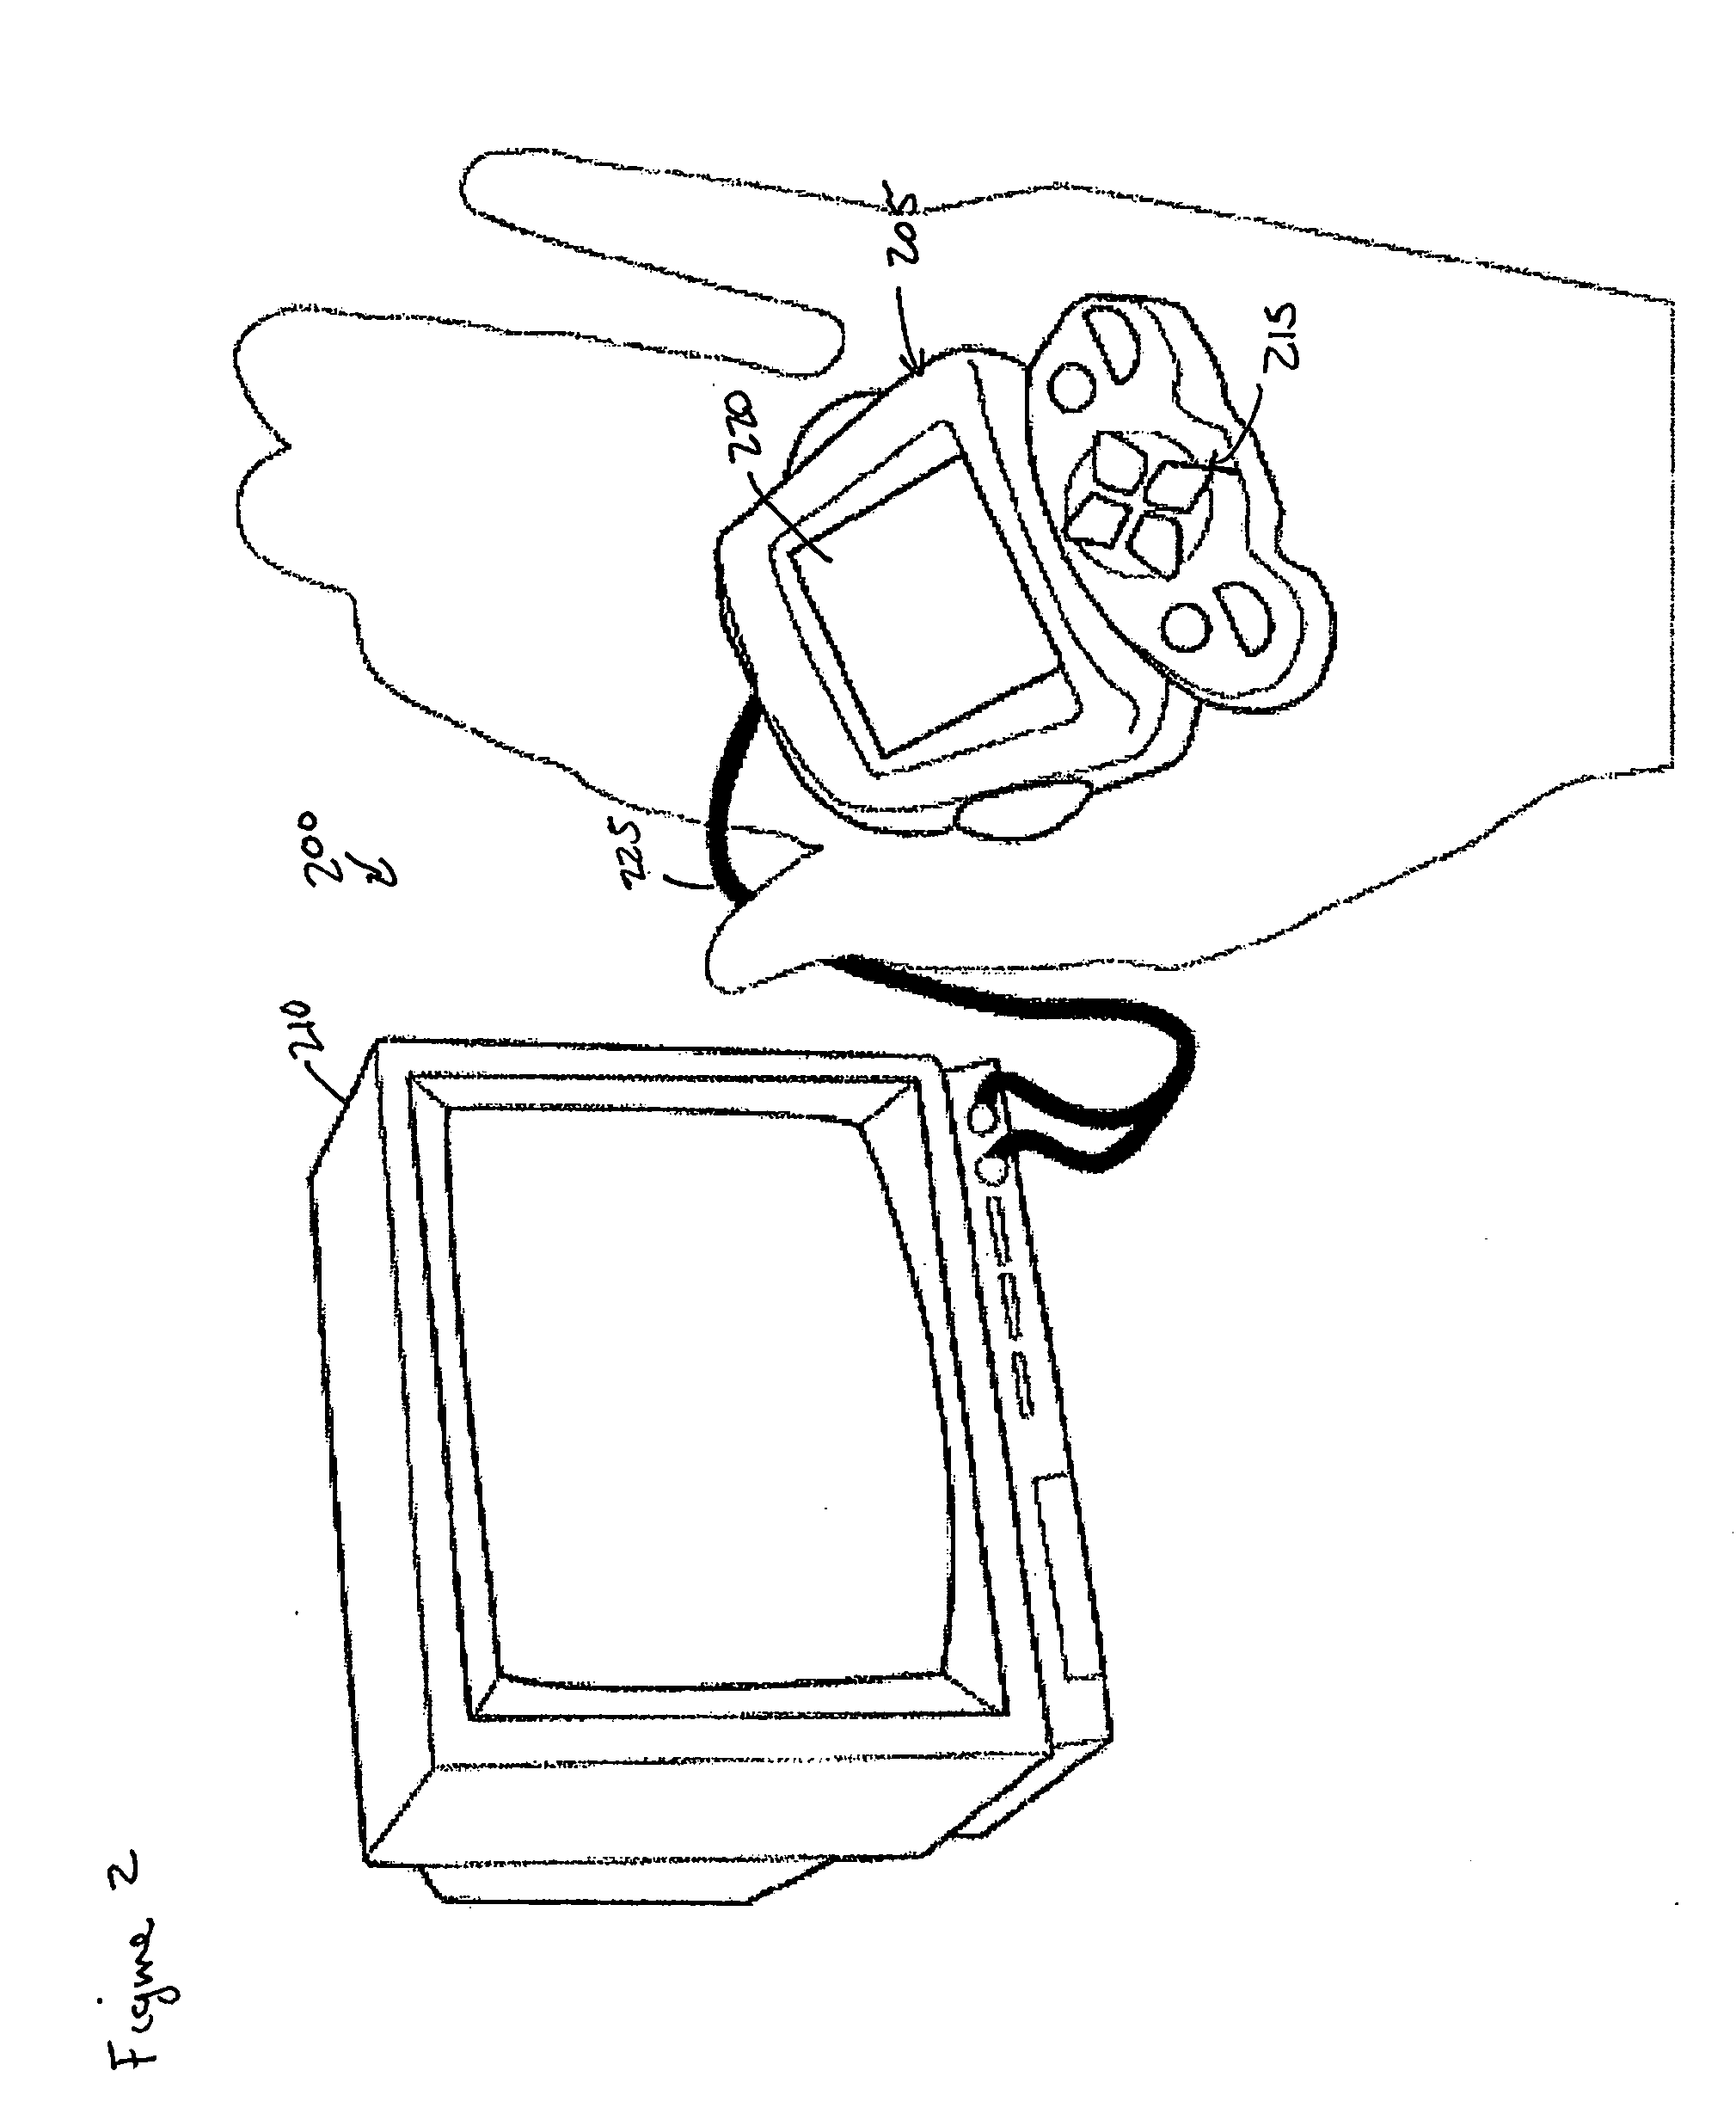 Portable hand-held entertainment system with connectivity to non-integrated displays